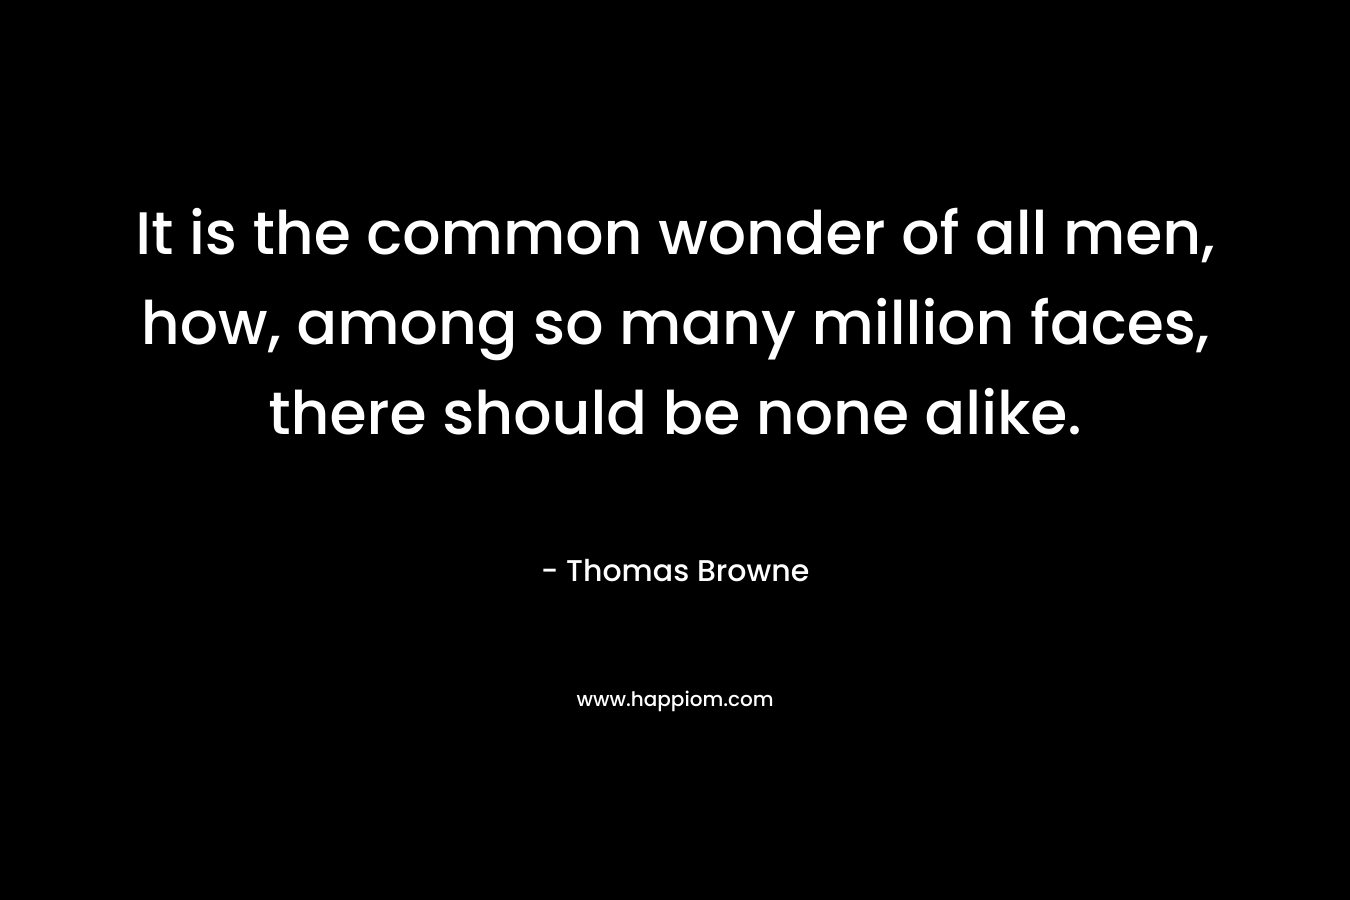 It is the common wonder of all men, how, among so many million faces, there should be none alike. – Thomas Browne